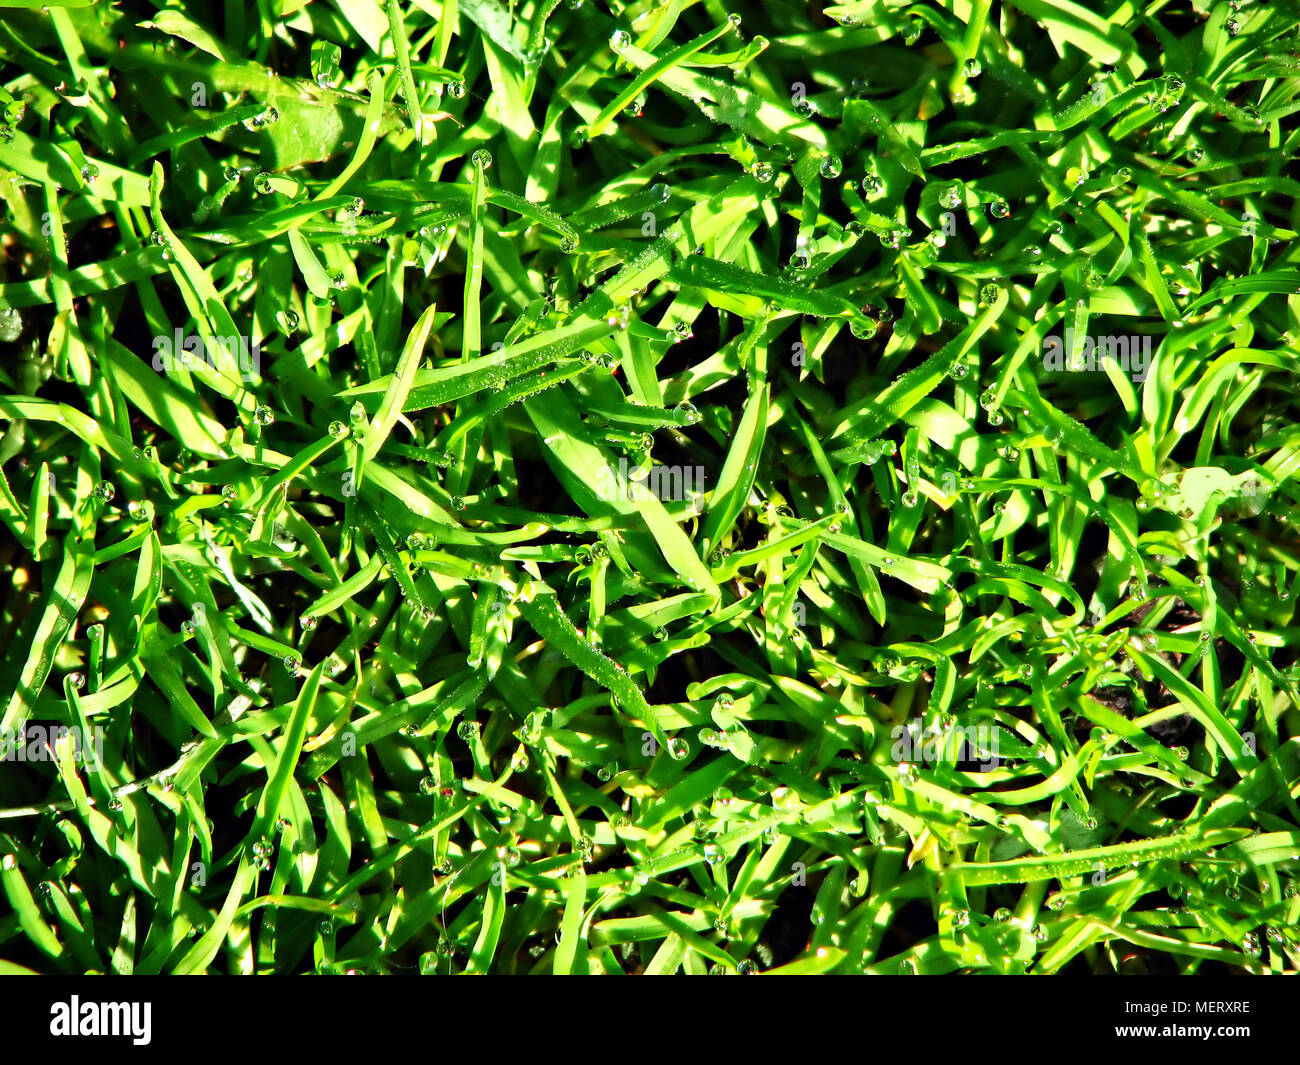 Grass with raindrops. Stock Photo